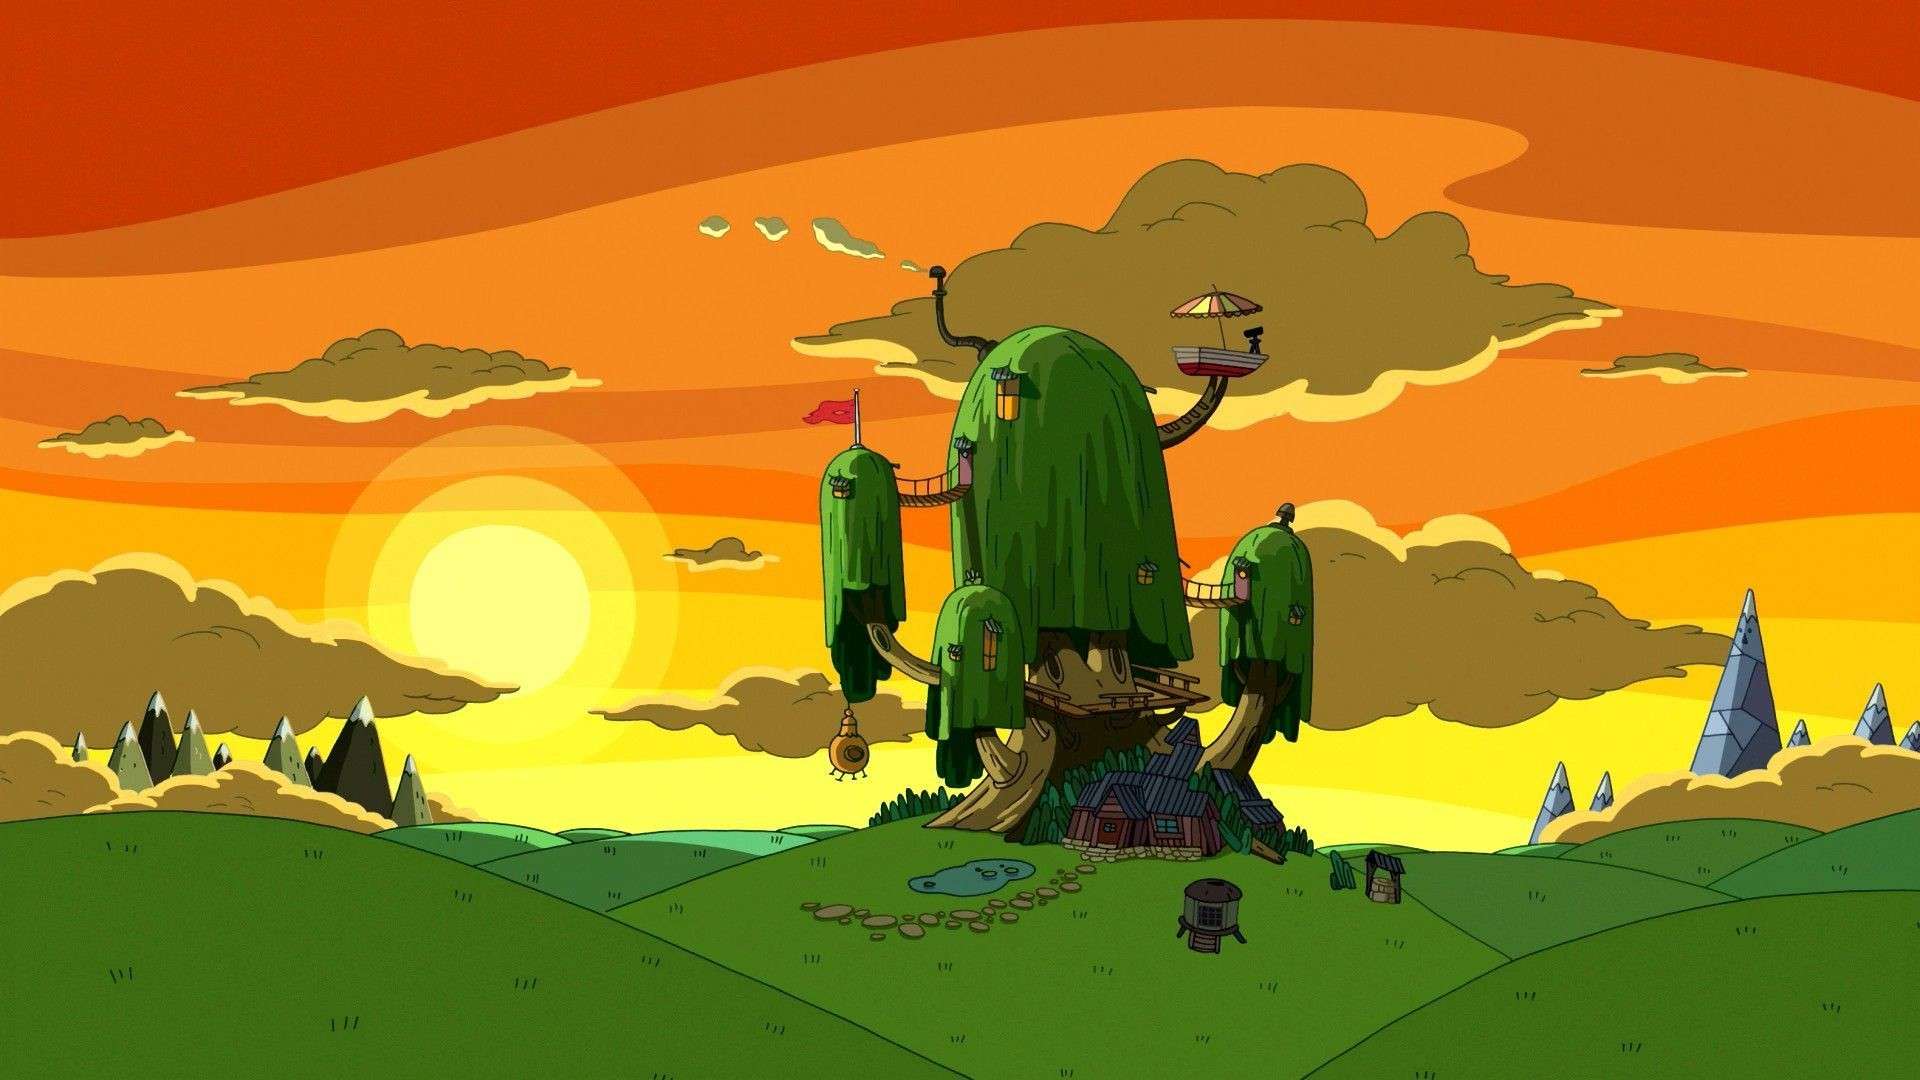 Adventure Time Landscape Wallpapers - Top Free Adventure Time Landscape